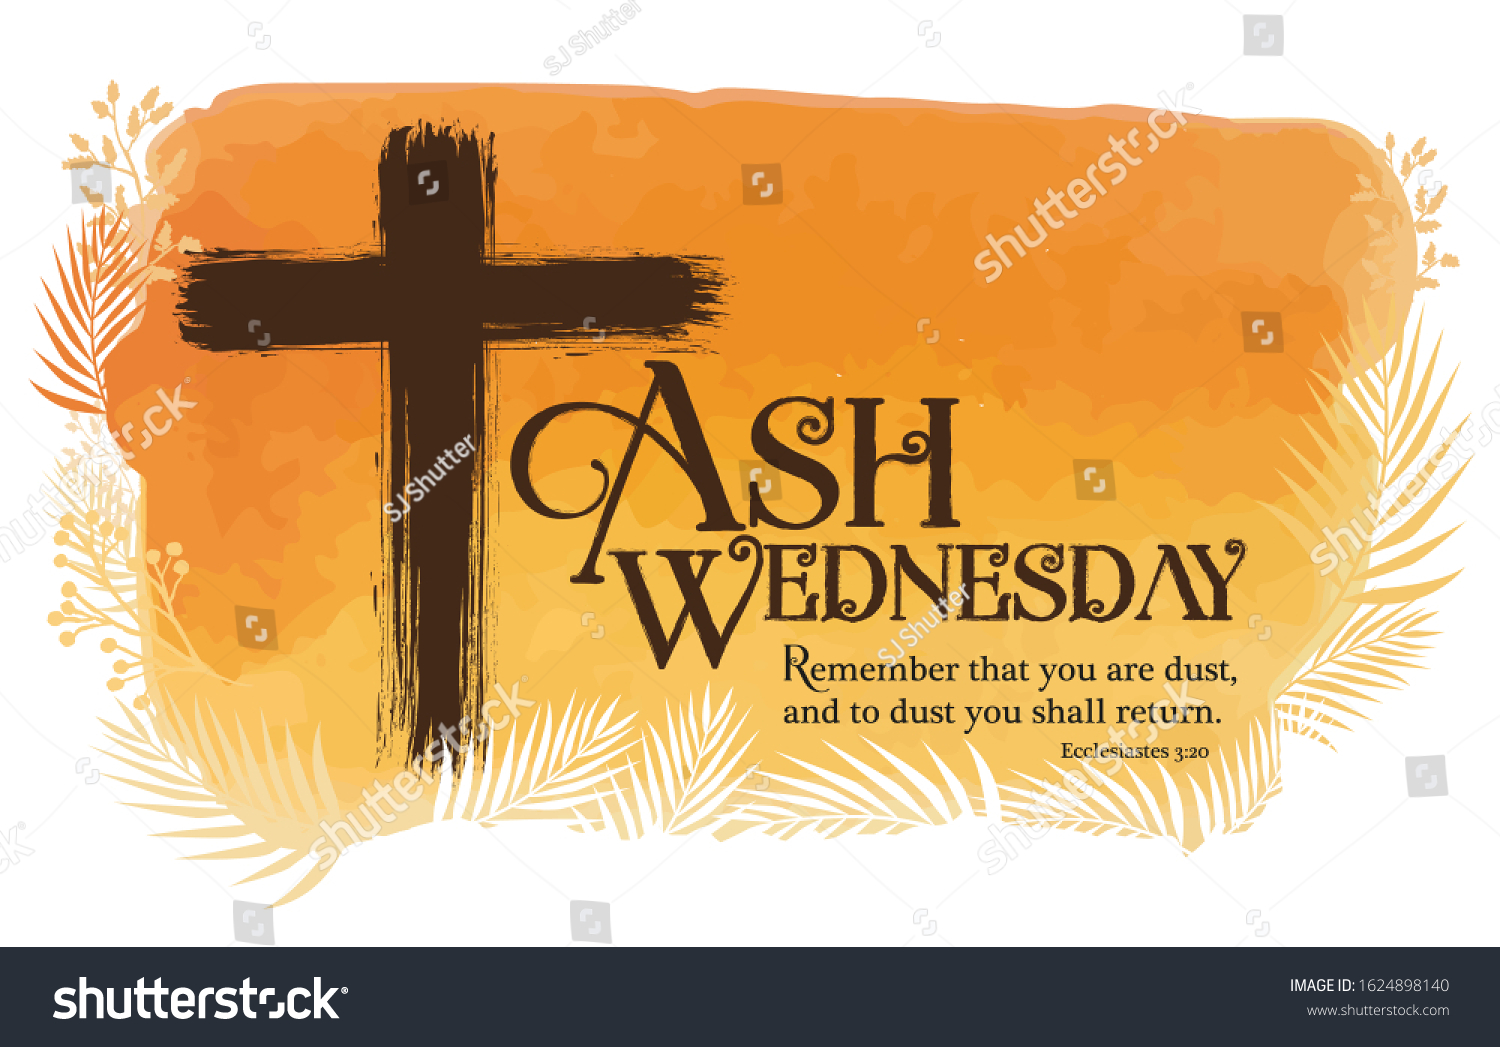 ash-wednesday-poster-vector-illustration-stock-vector-royalty-free-1624898140